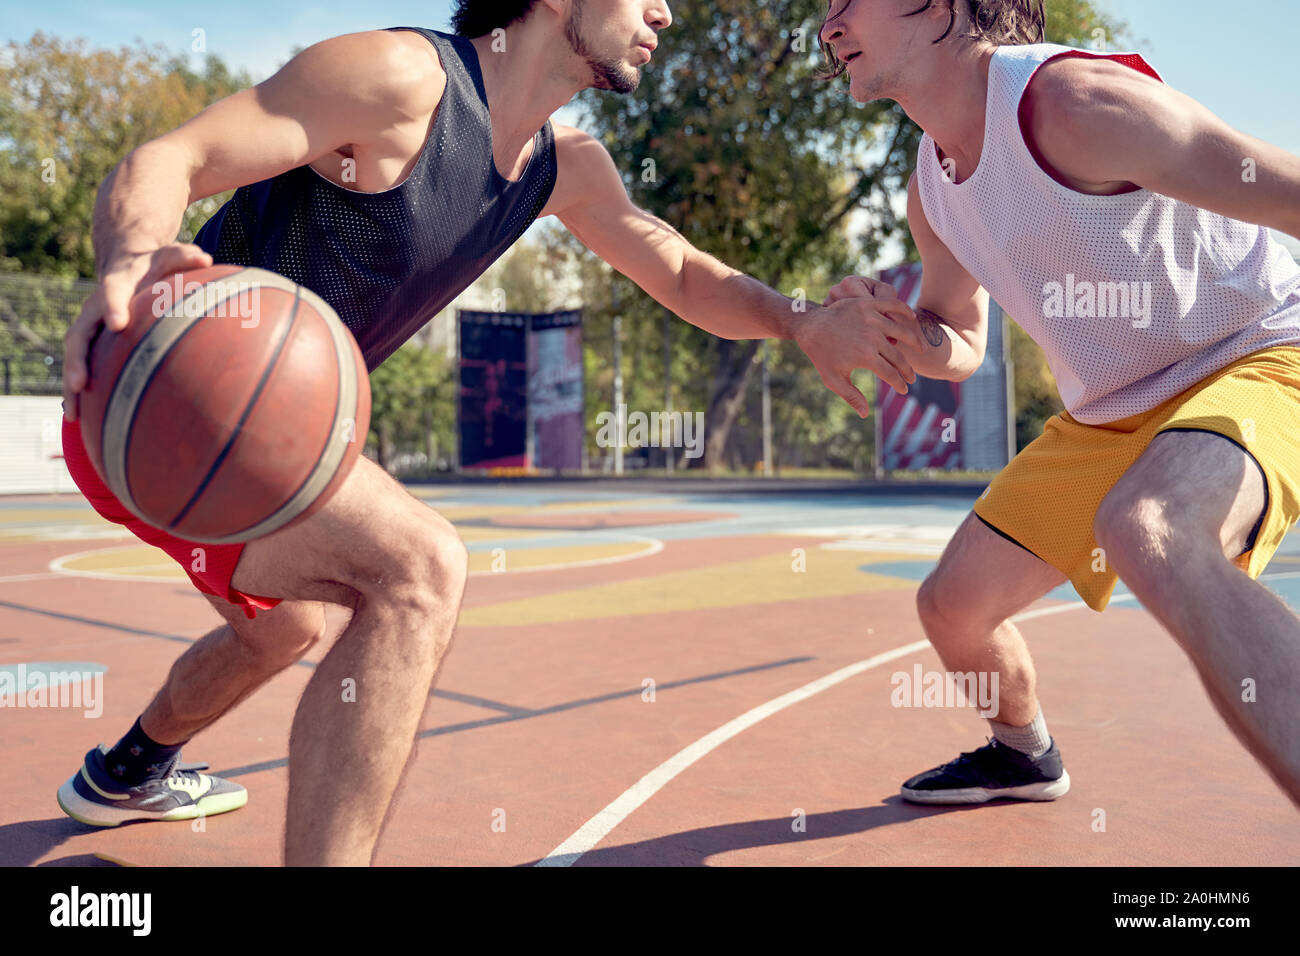 Image of sporty men playing basketball on playground on summer day against background of green trees Stock Photo